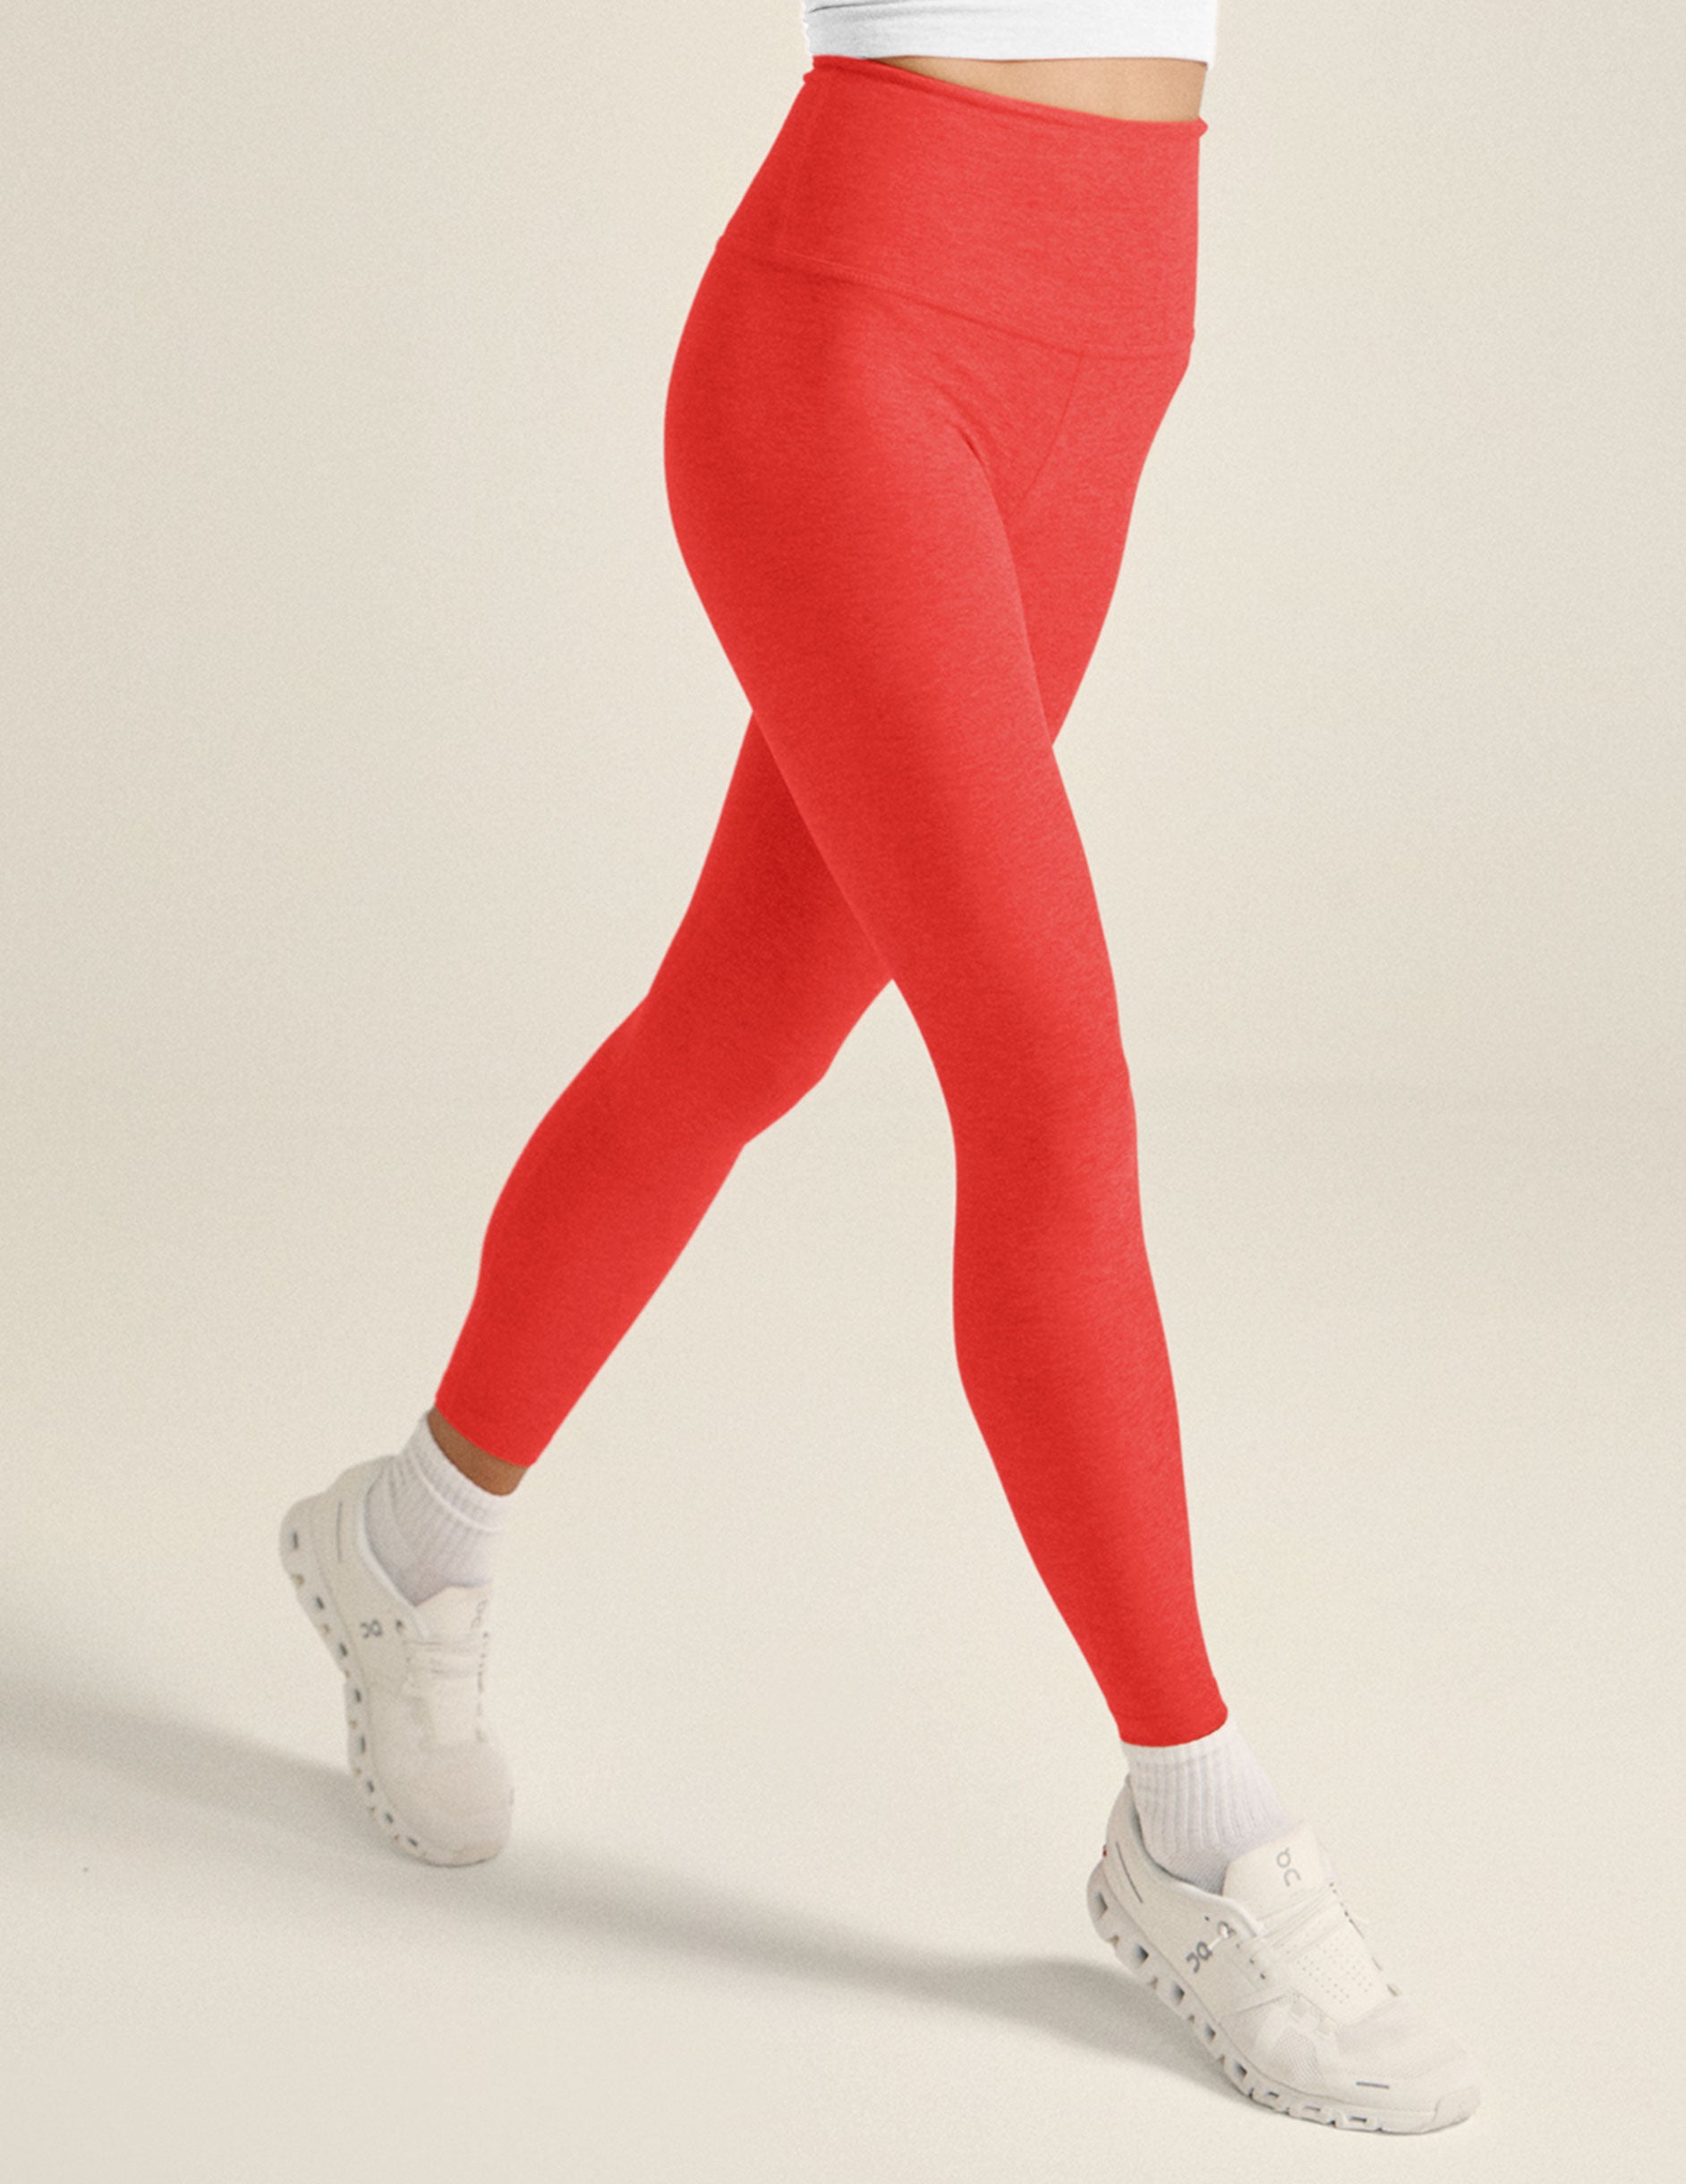 Beyond Yoga Spacedye Caught In The Midi High Waisted Legging in Red Sand  Heather